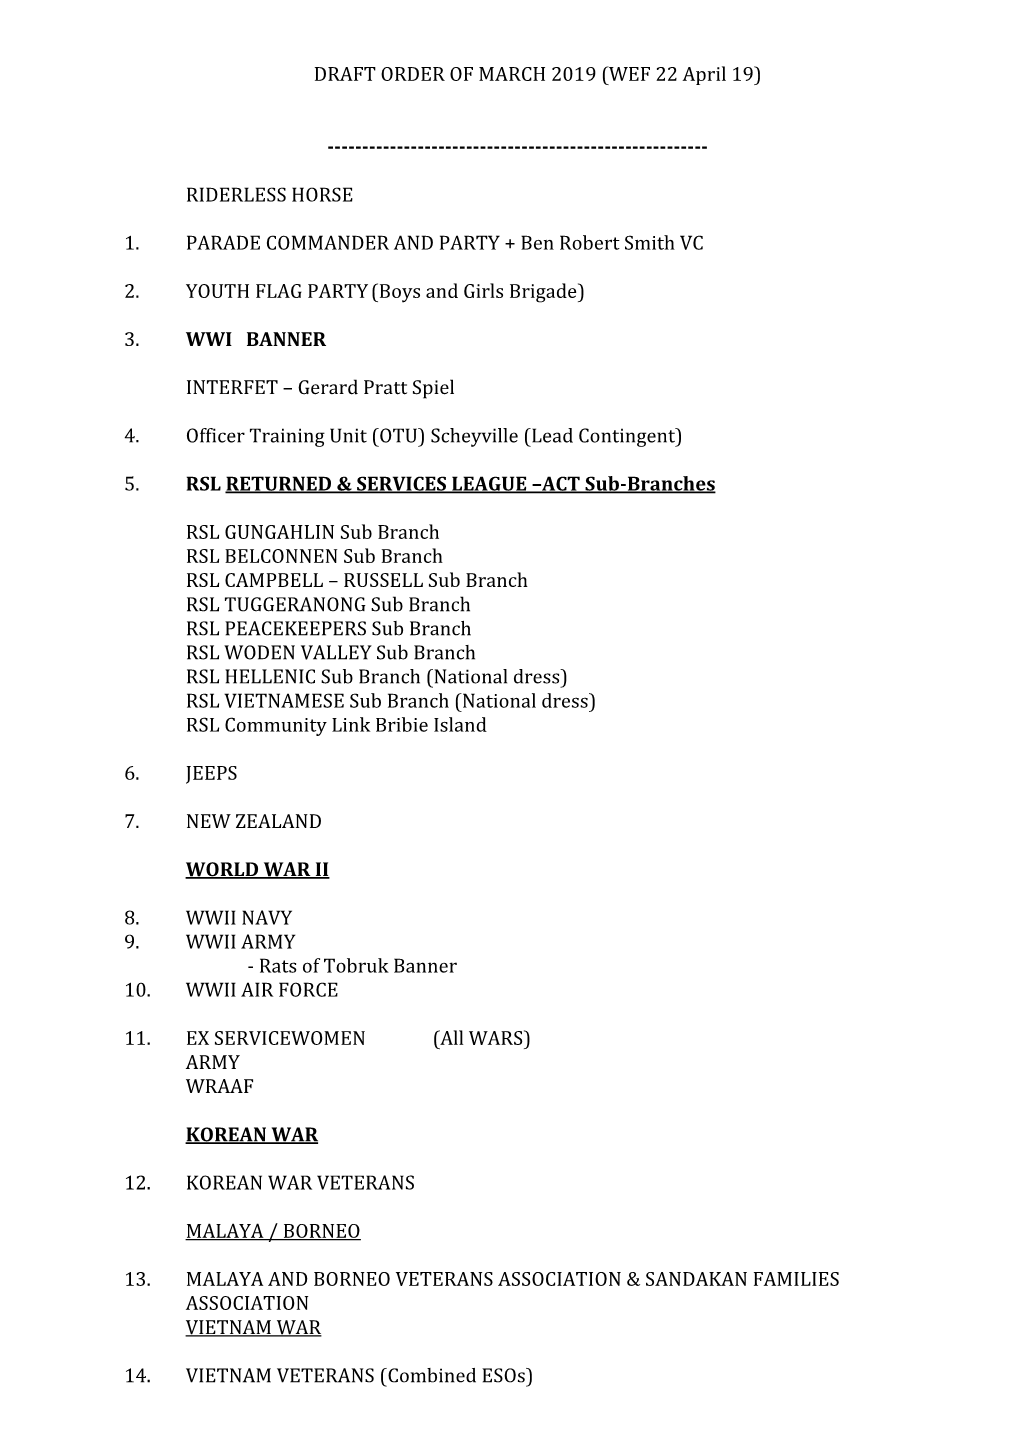 DRAFT ORDER of MARCH 2019 (WEF 22 April 19)